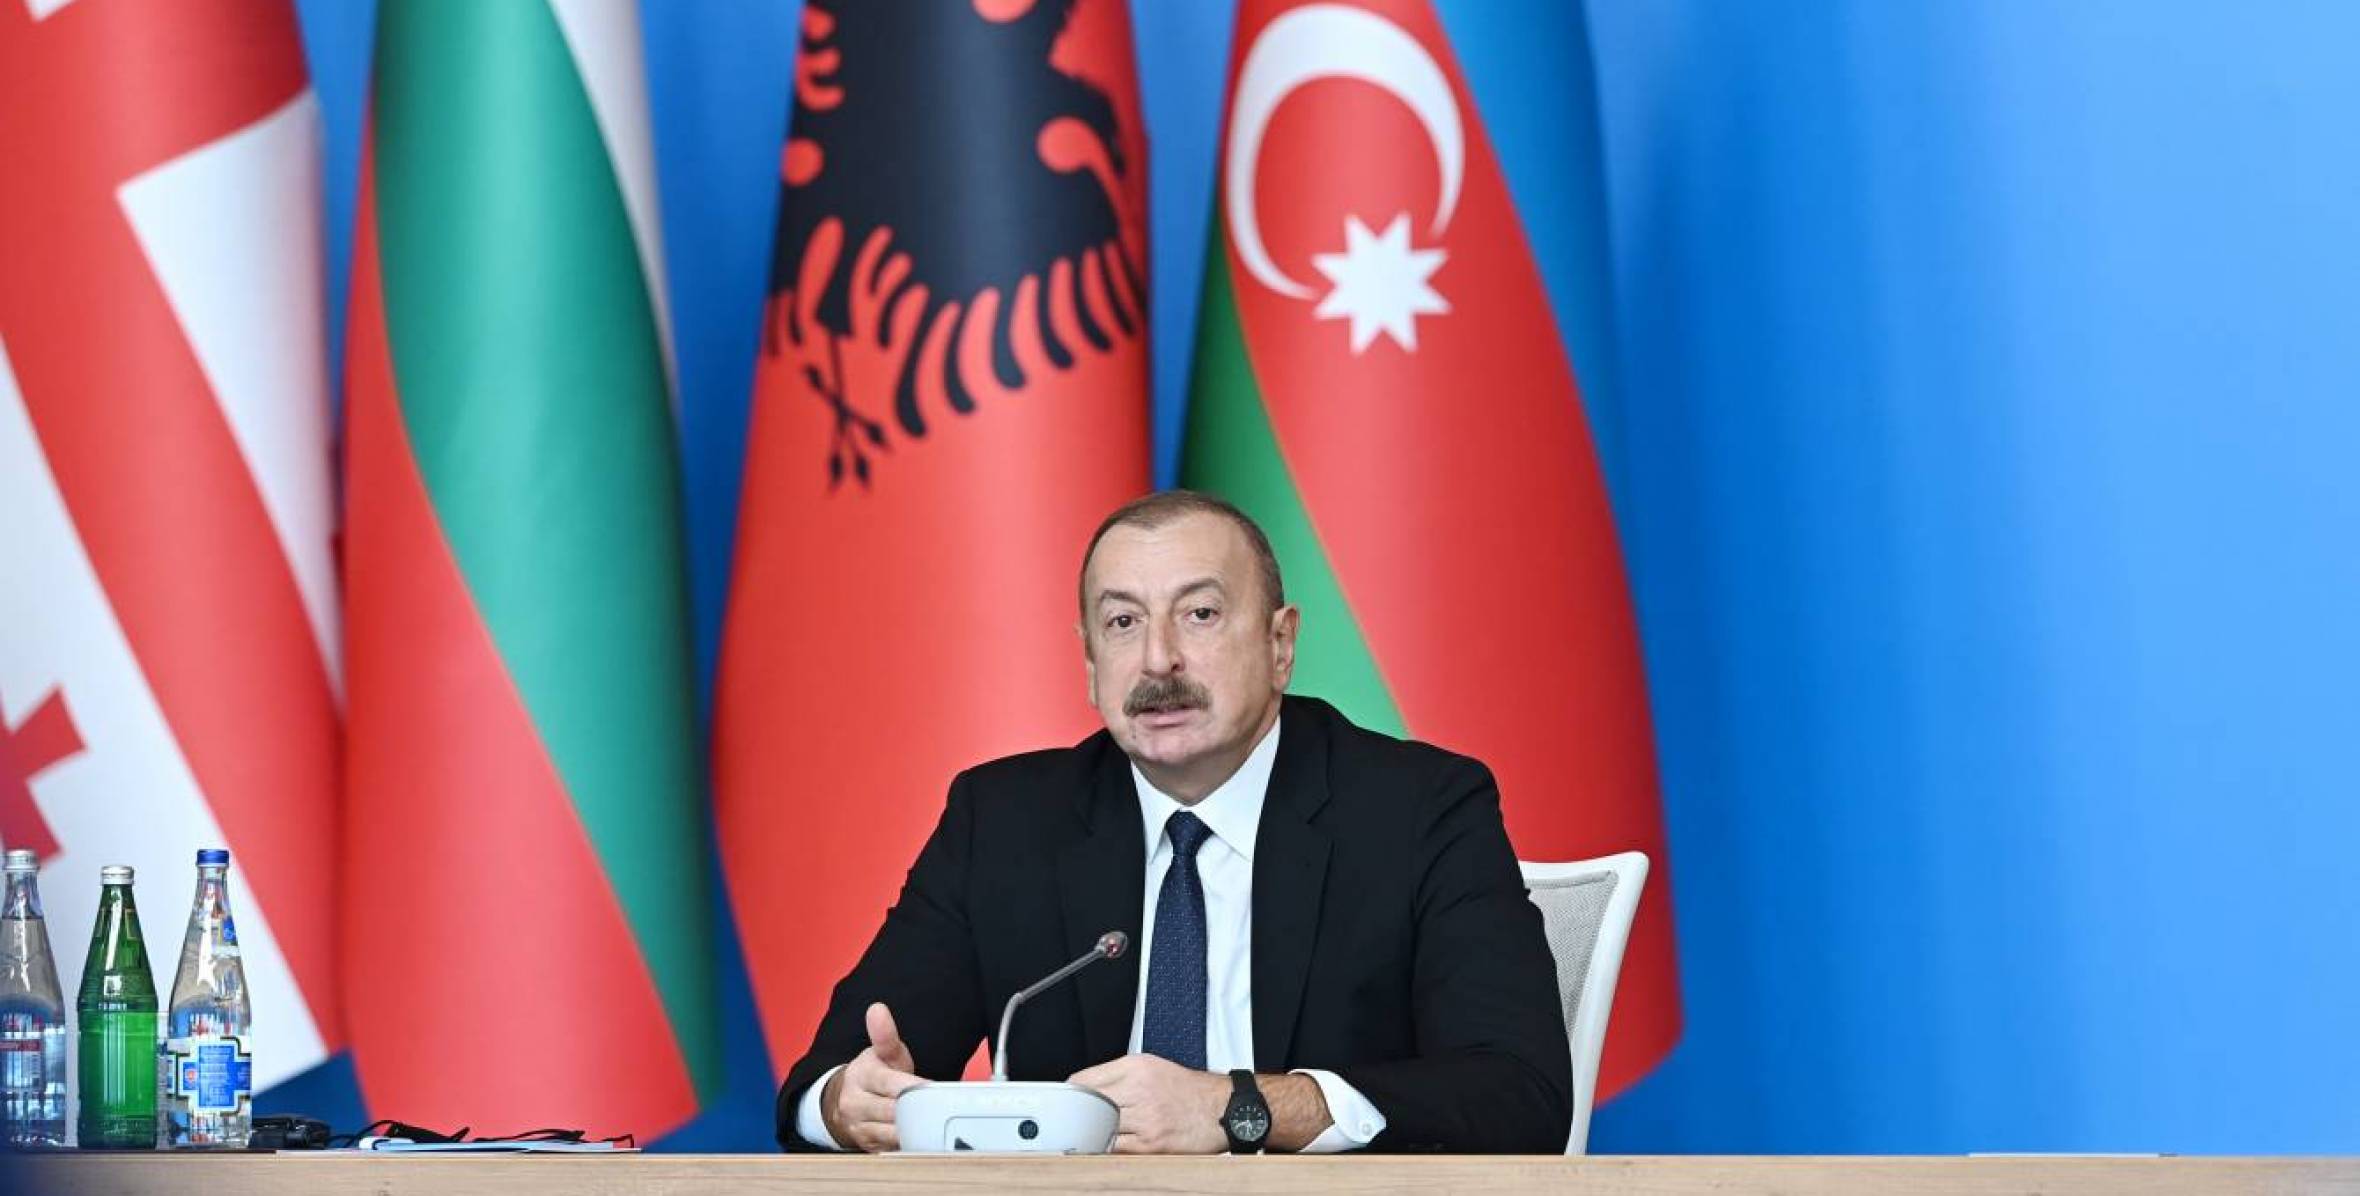 Speech by Ilham Aliyev at the 8th Ministerial Meeting of SGC Advisory Council in Baku